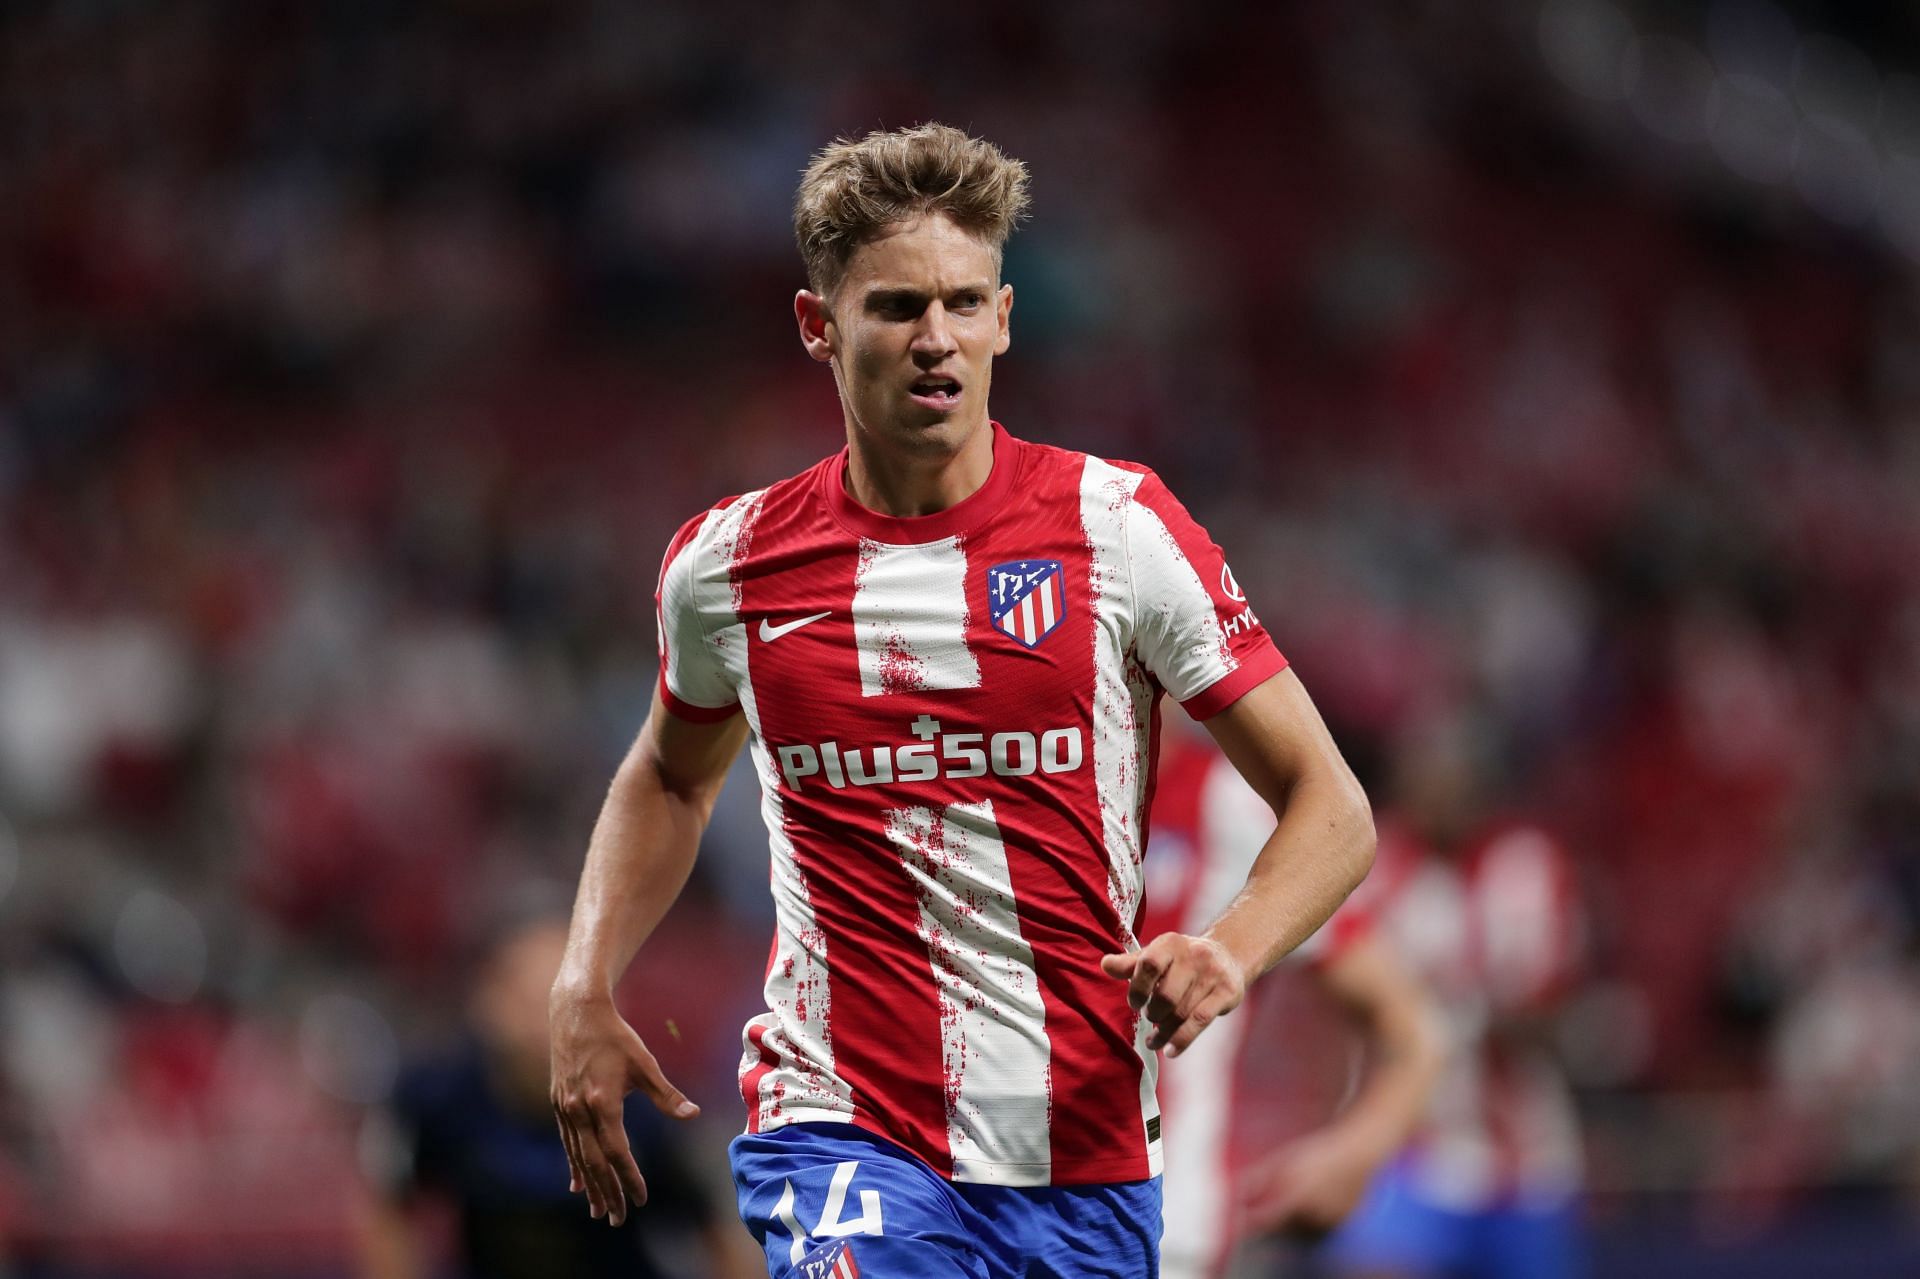 Marcos Llorente has been a key player for Atletico Madrid.